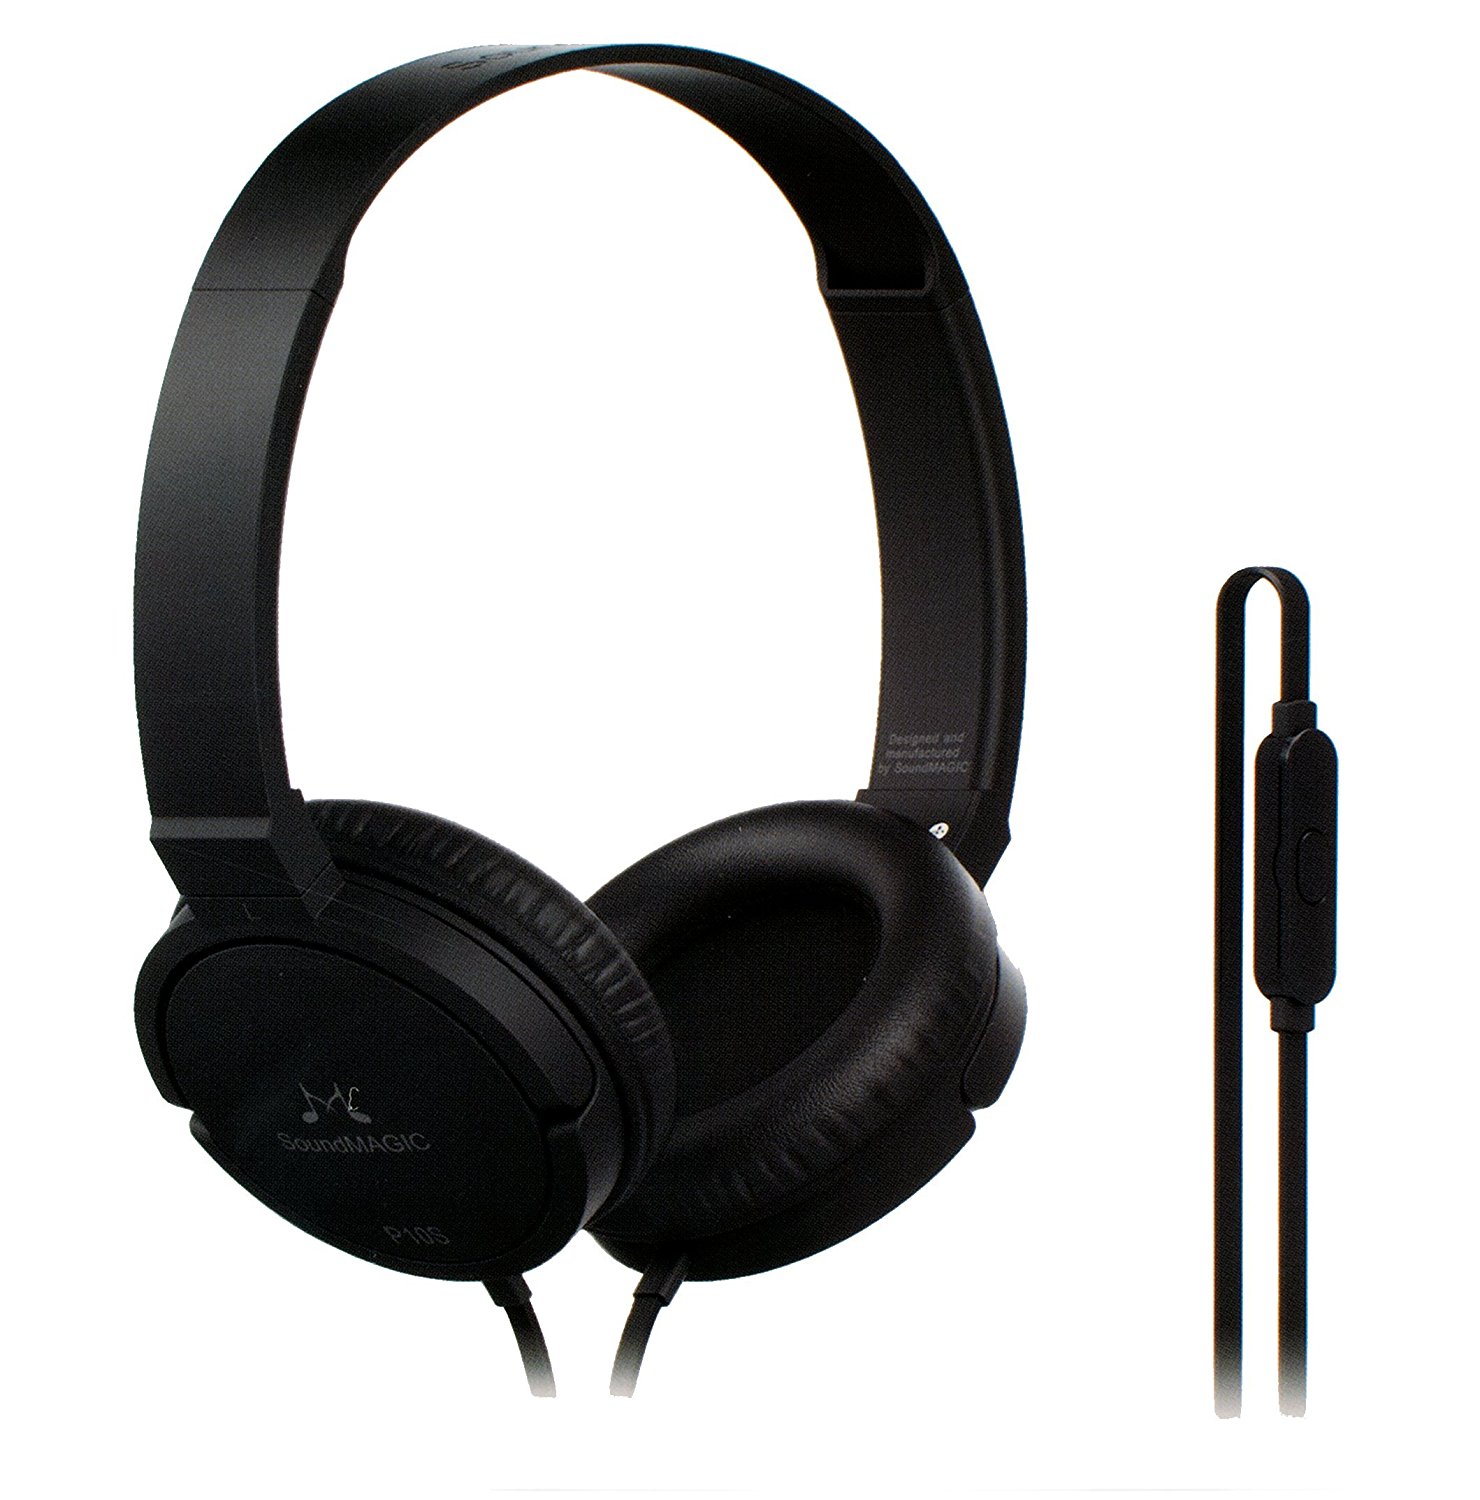 Amazon - Buy SoundMagic P10S Headphone with Mic(black, white colors) for just Rs.399(73% off)